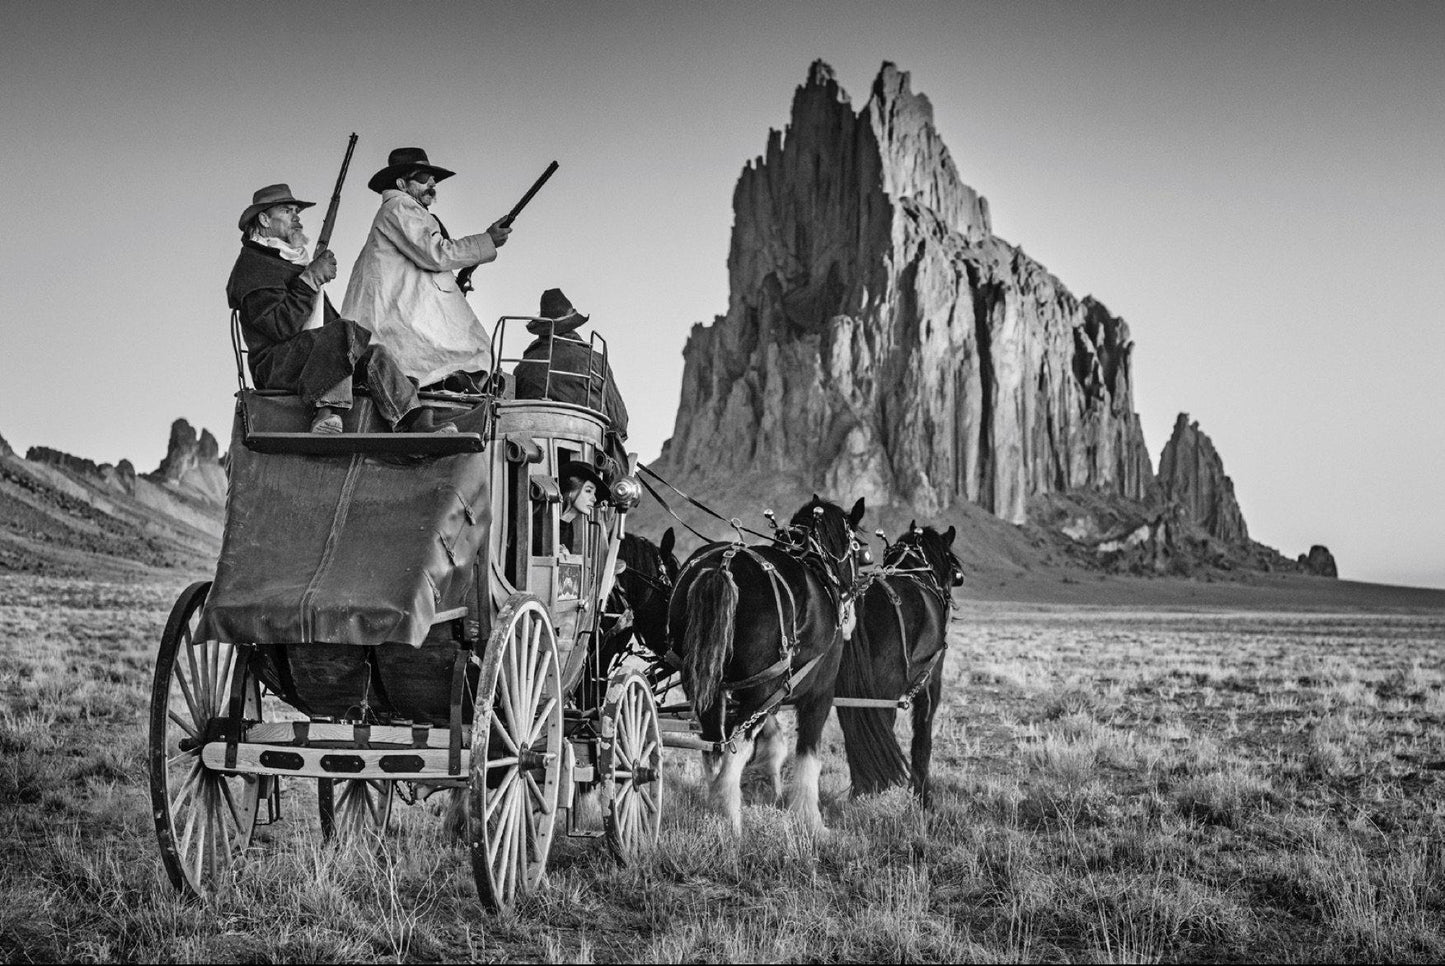 Between A Rock and a Hard Place-Photographic Print-David Yarrow-Sorrel Sky Gallery